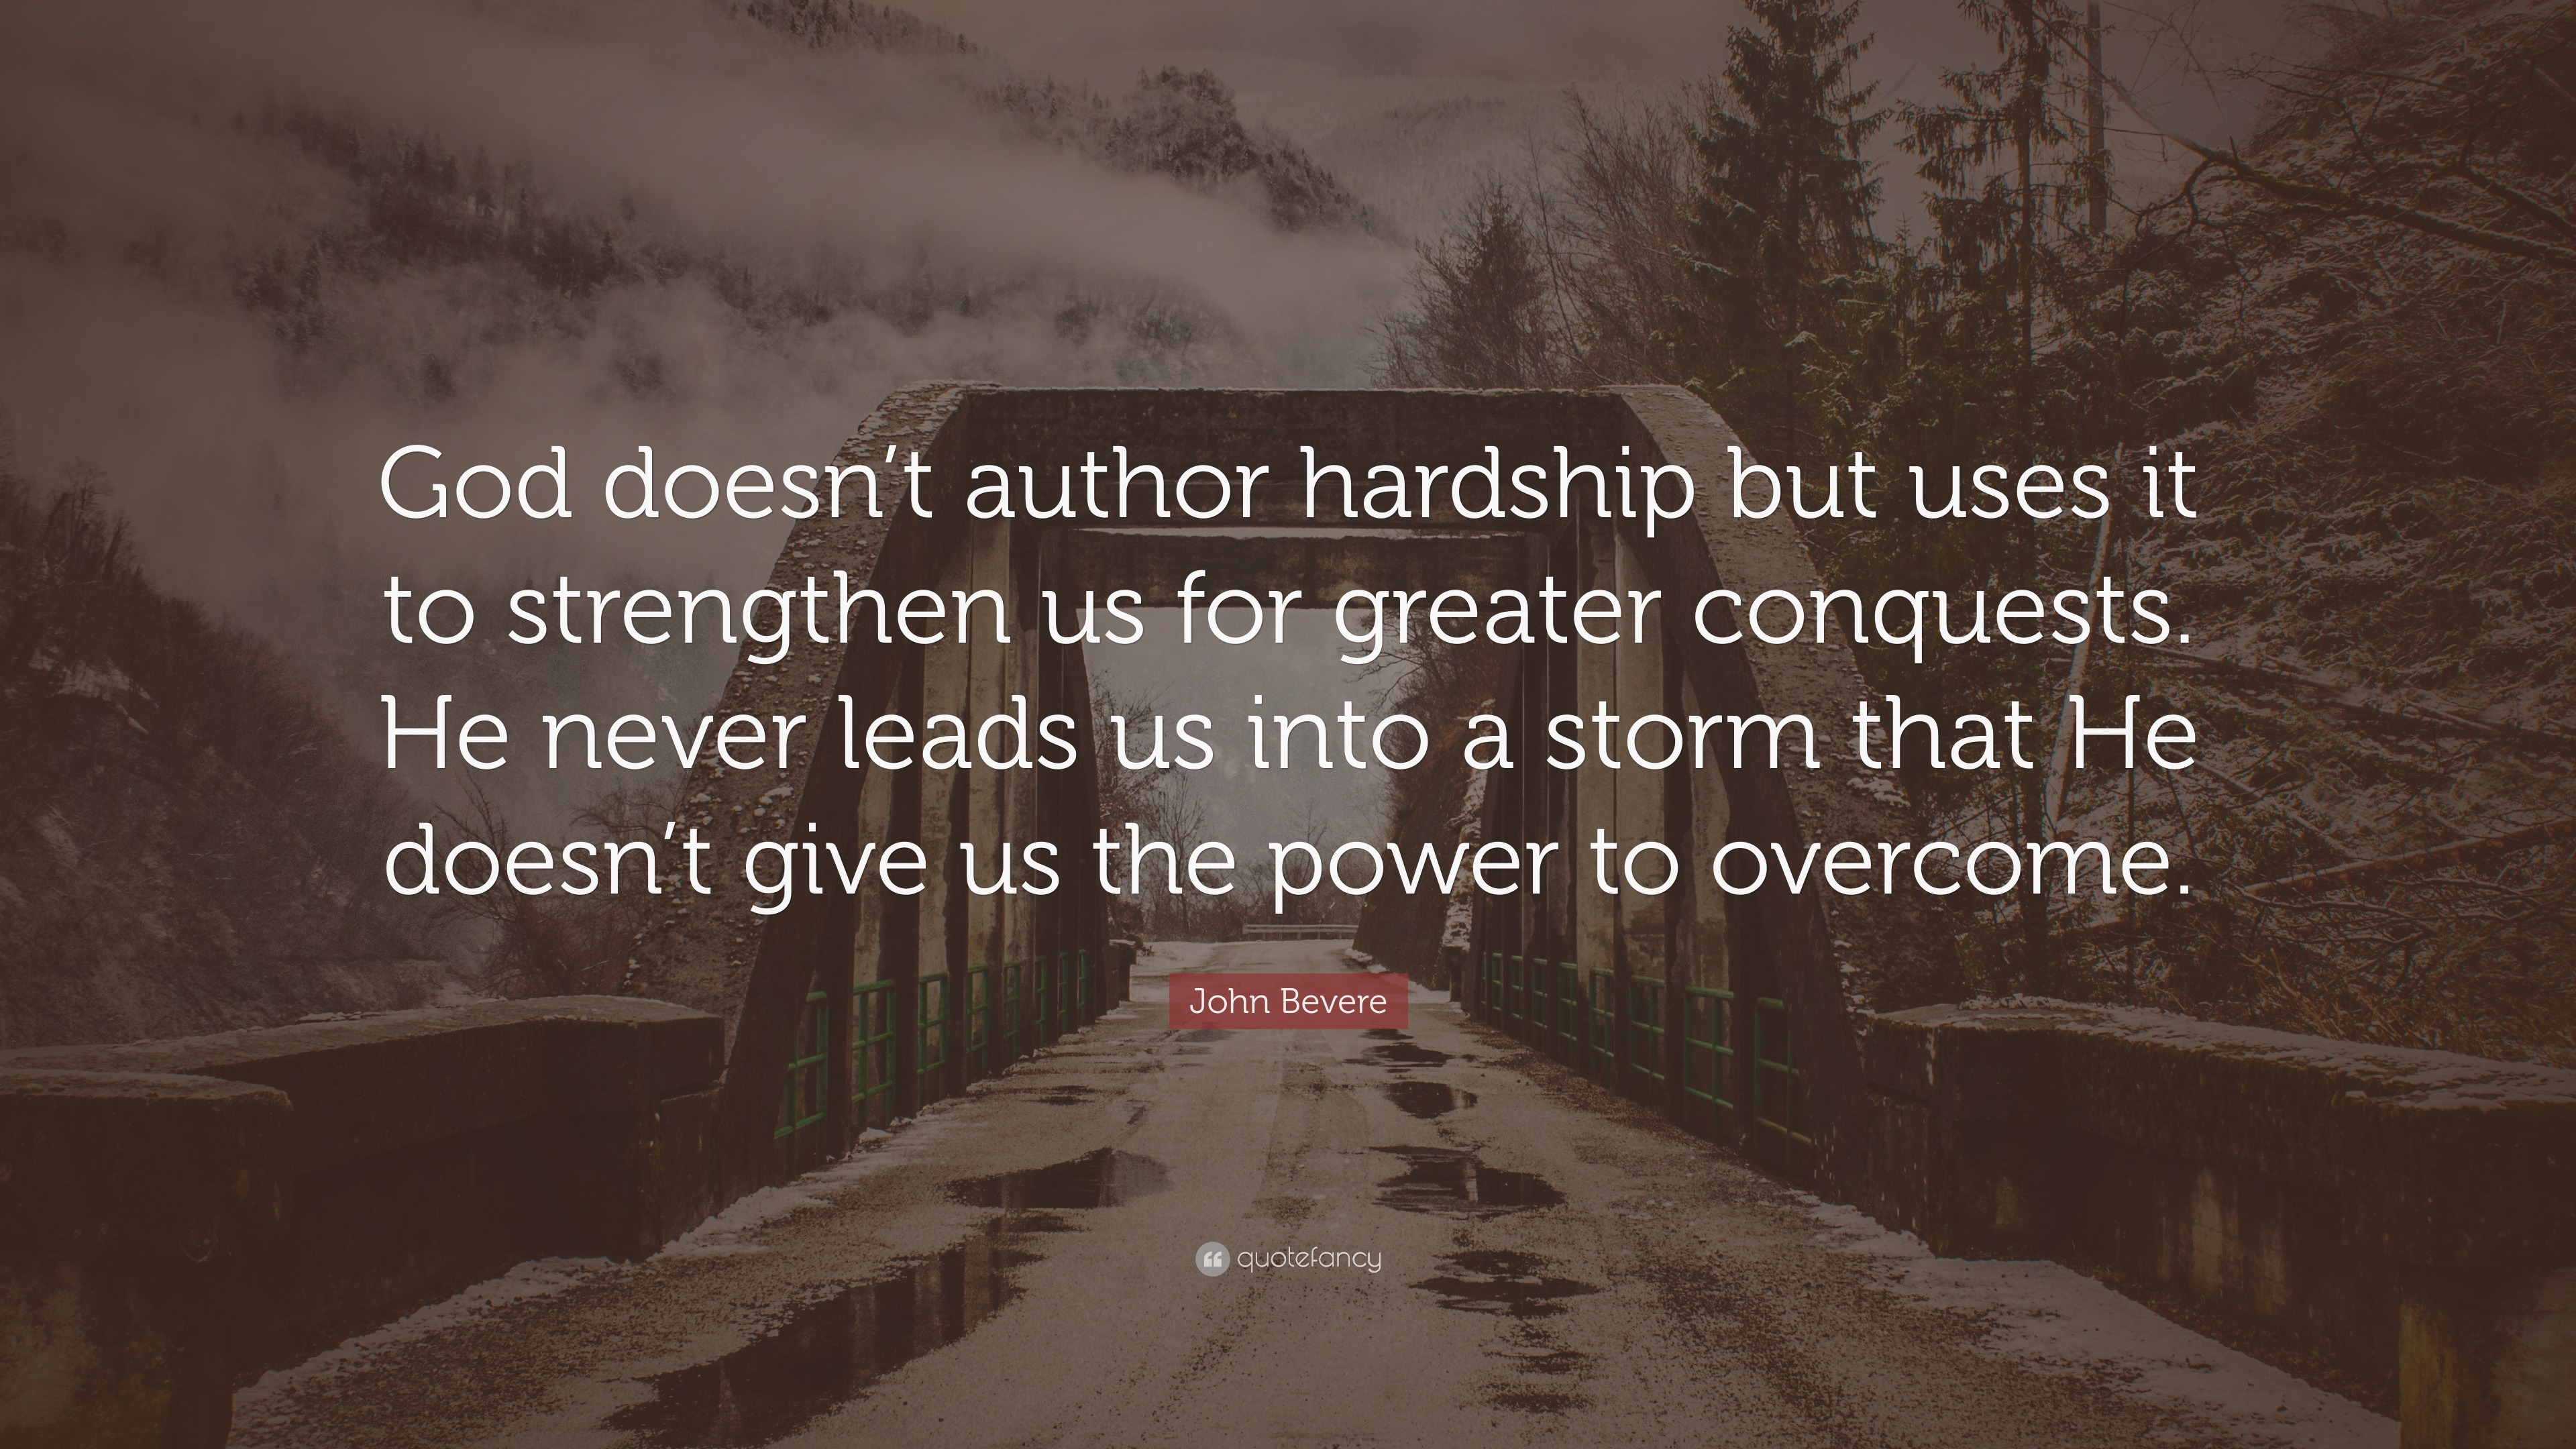 John Bevere Quote: "God doesn't author hardship but uses it to strengthen us for greater ...